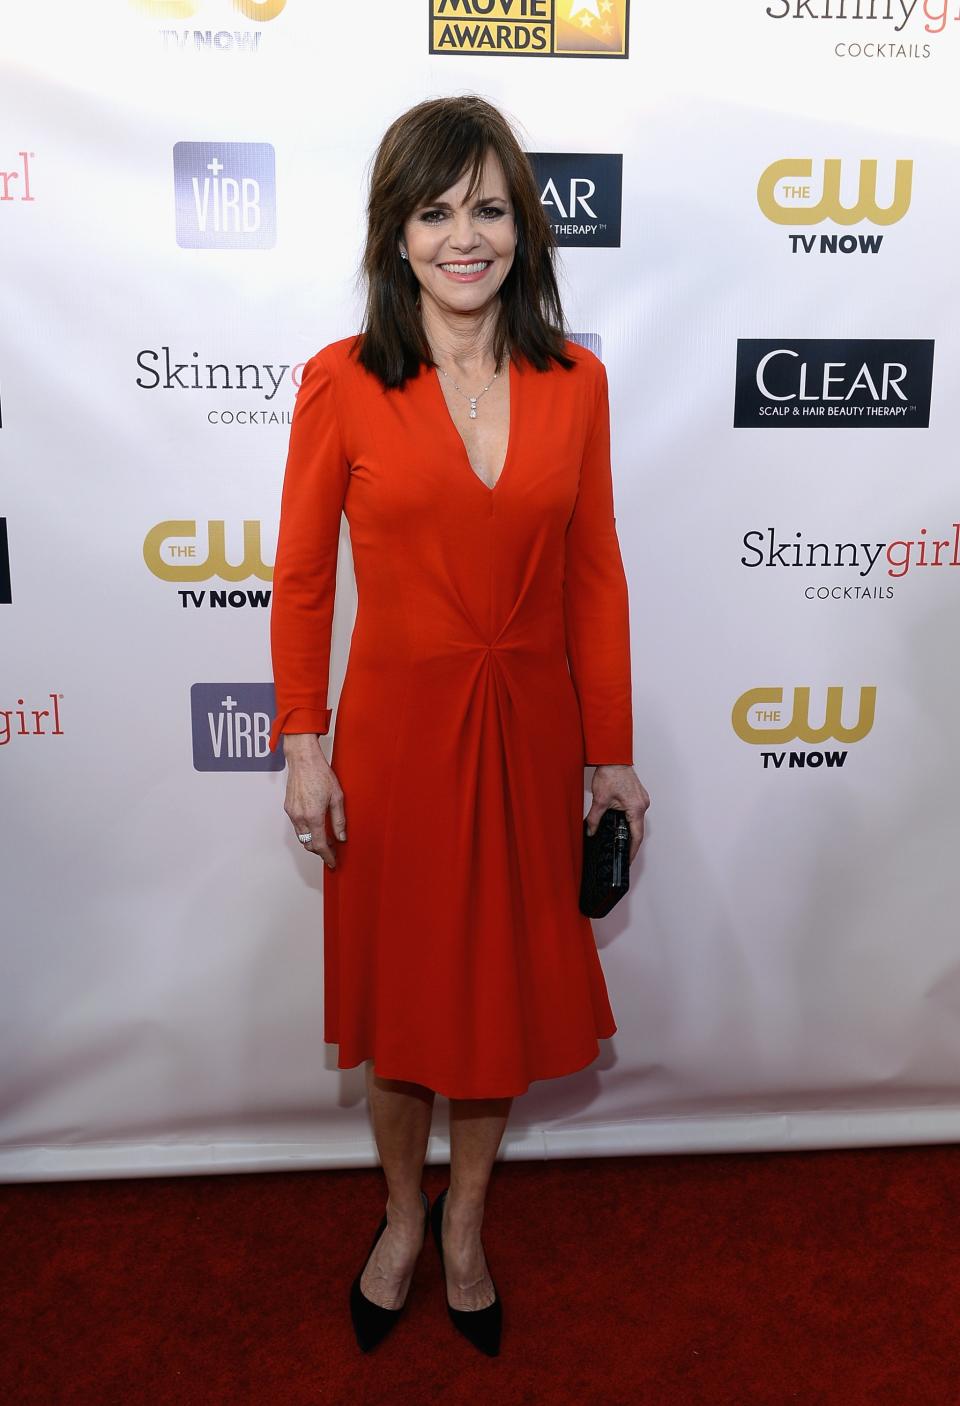 SANTA MONICA, CA - JANUARY 10: Actress Sally Field attends the 18th Annual Critics' Choice Movie Awards held at Barker Hangar on January 10, 2013 in Santa Monica, California. (Photo by Larry Busacca/Getty Images for BFCA)